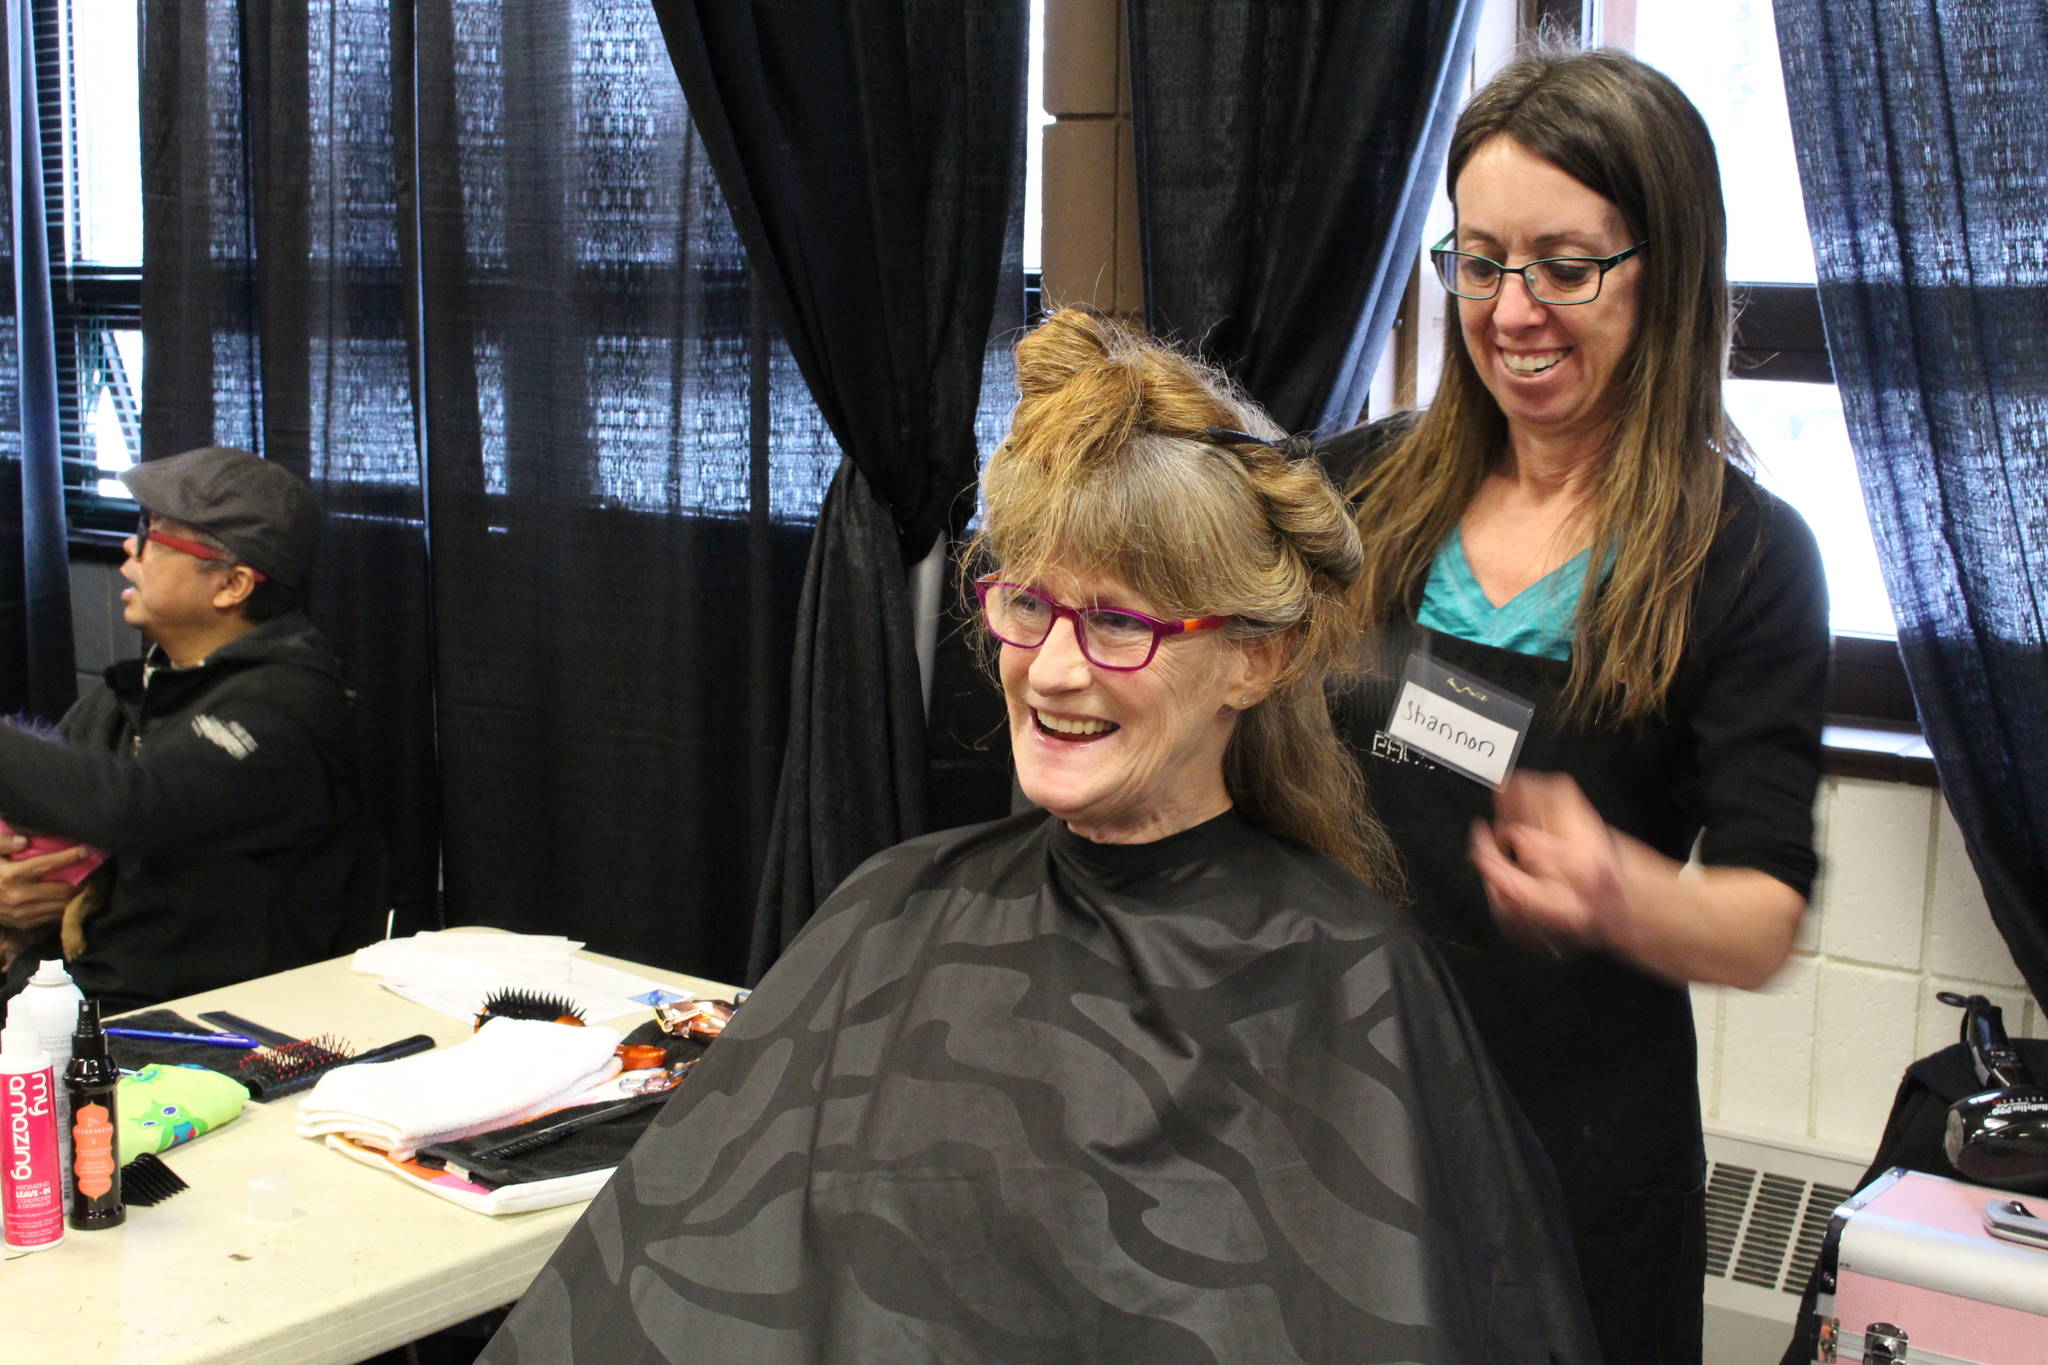 Junetta Delong gets her hair cut during the 2020 Project Homeless Connect event at the Soldotna Regional Sports Complex in Soldotna, Alaska, on Jan. 29, 2020. (Photo by Brian Mazurek/Peninsula Clarion)